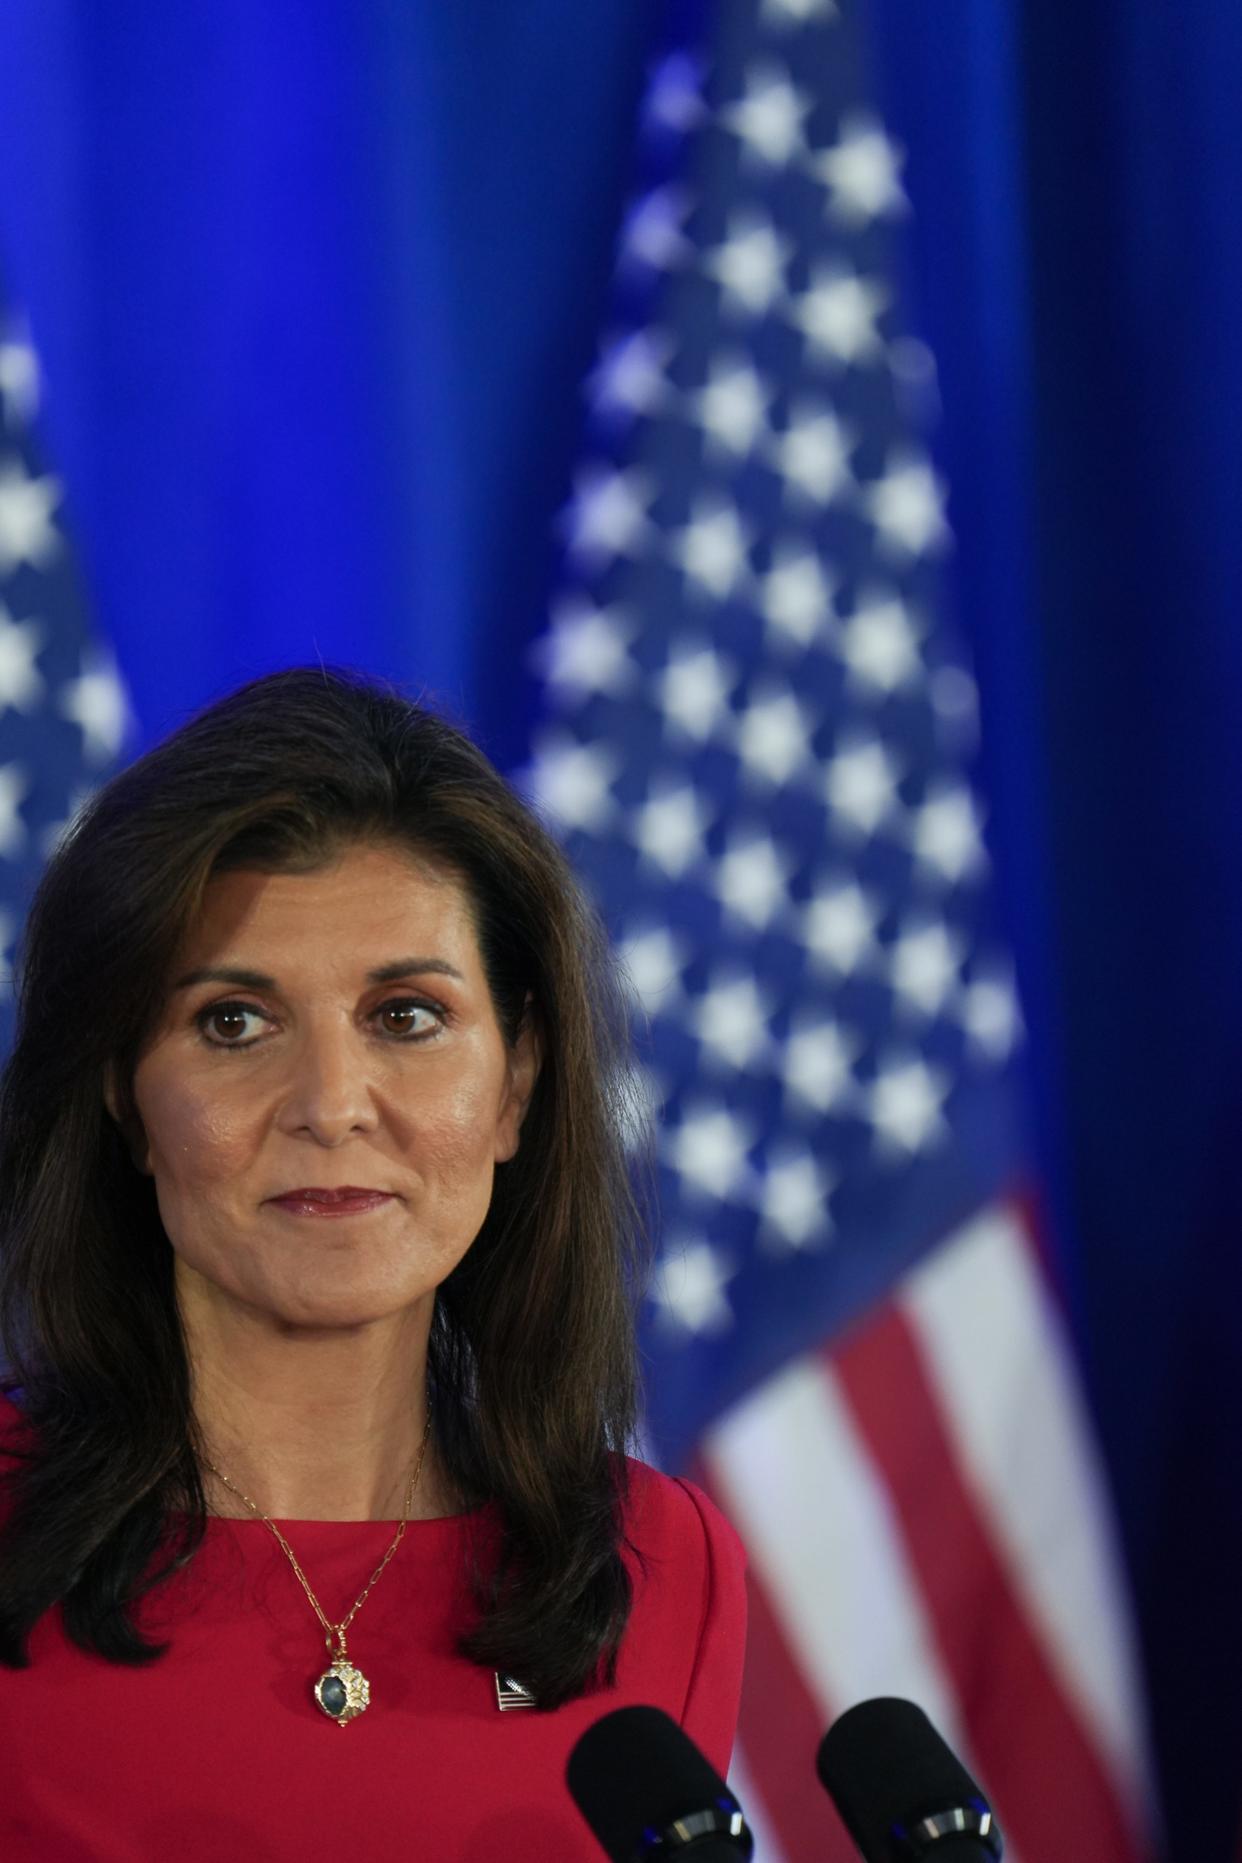 Republican presidential candidate Nikki Haley said on March 6, 2024, a day after Super Tuesday, she is suspending her campaign. Haley spoke to media and some campaign staff, doubling down on not supporting former President Donald Trump.